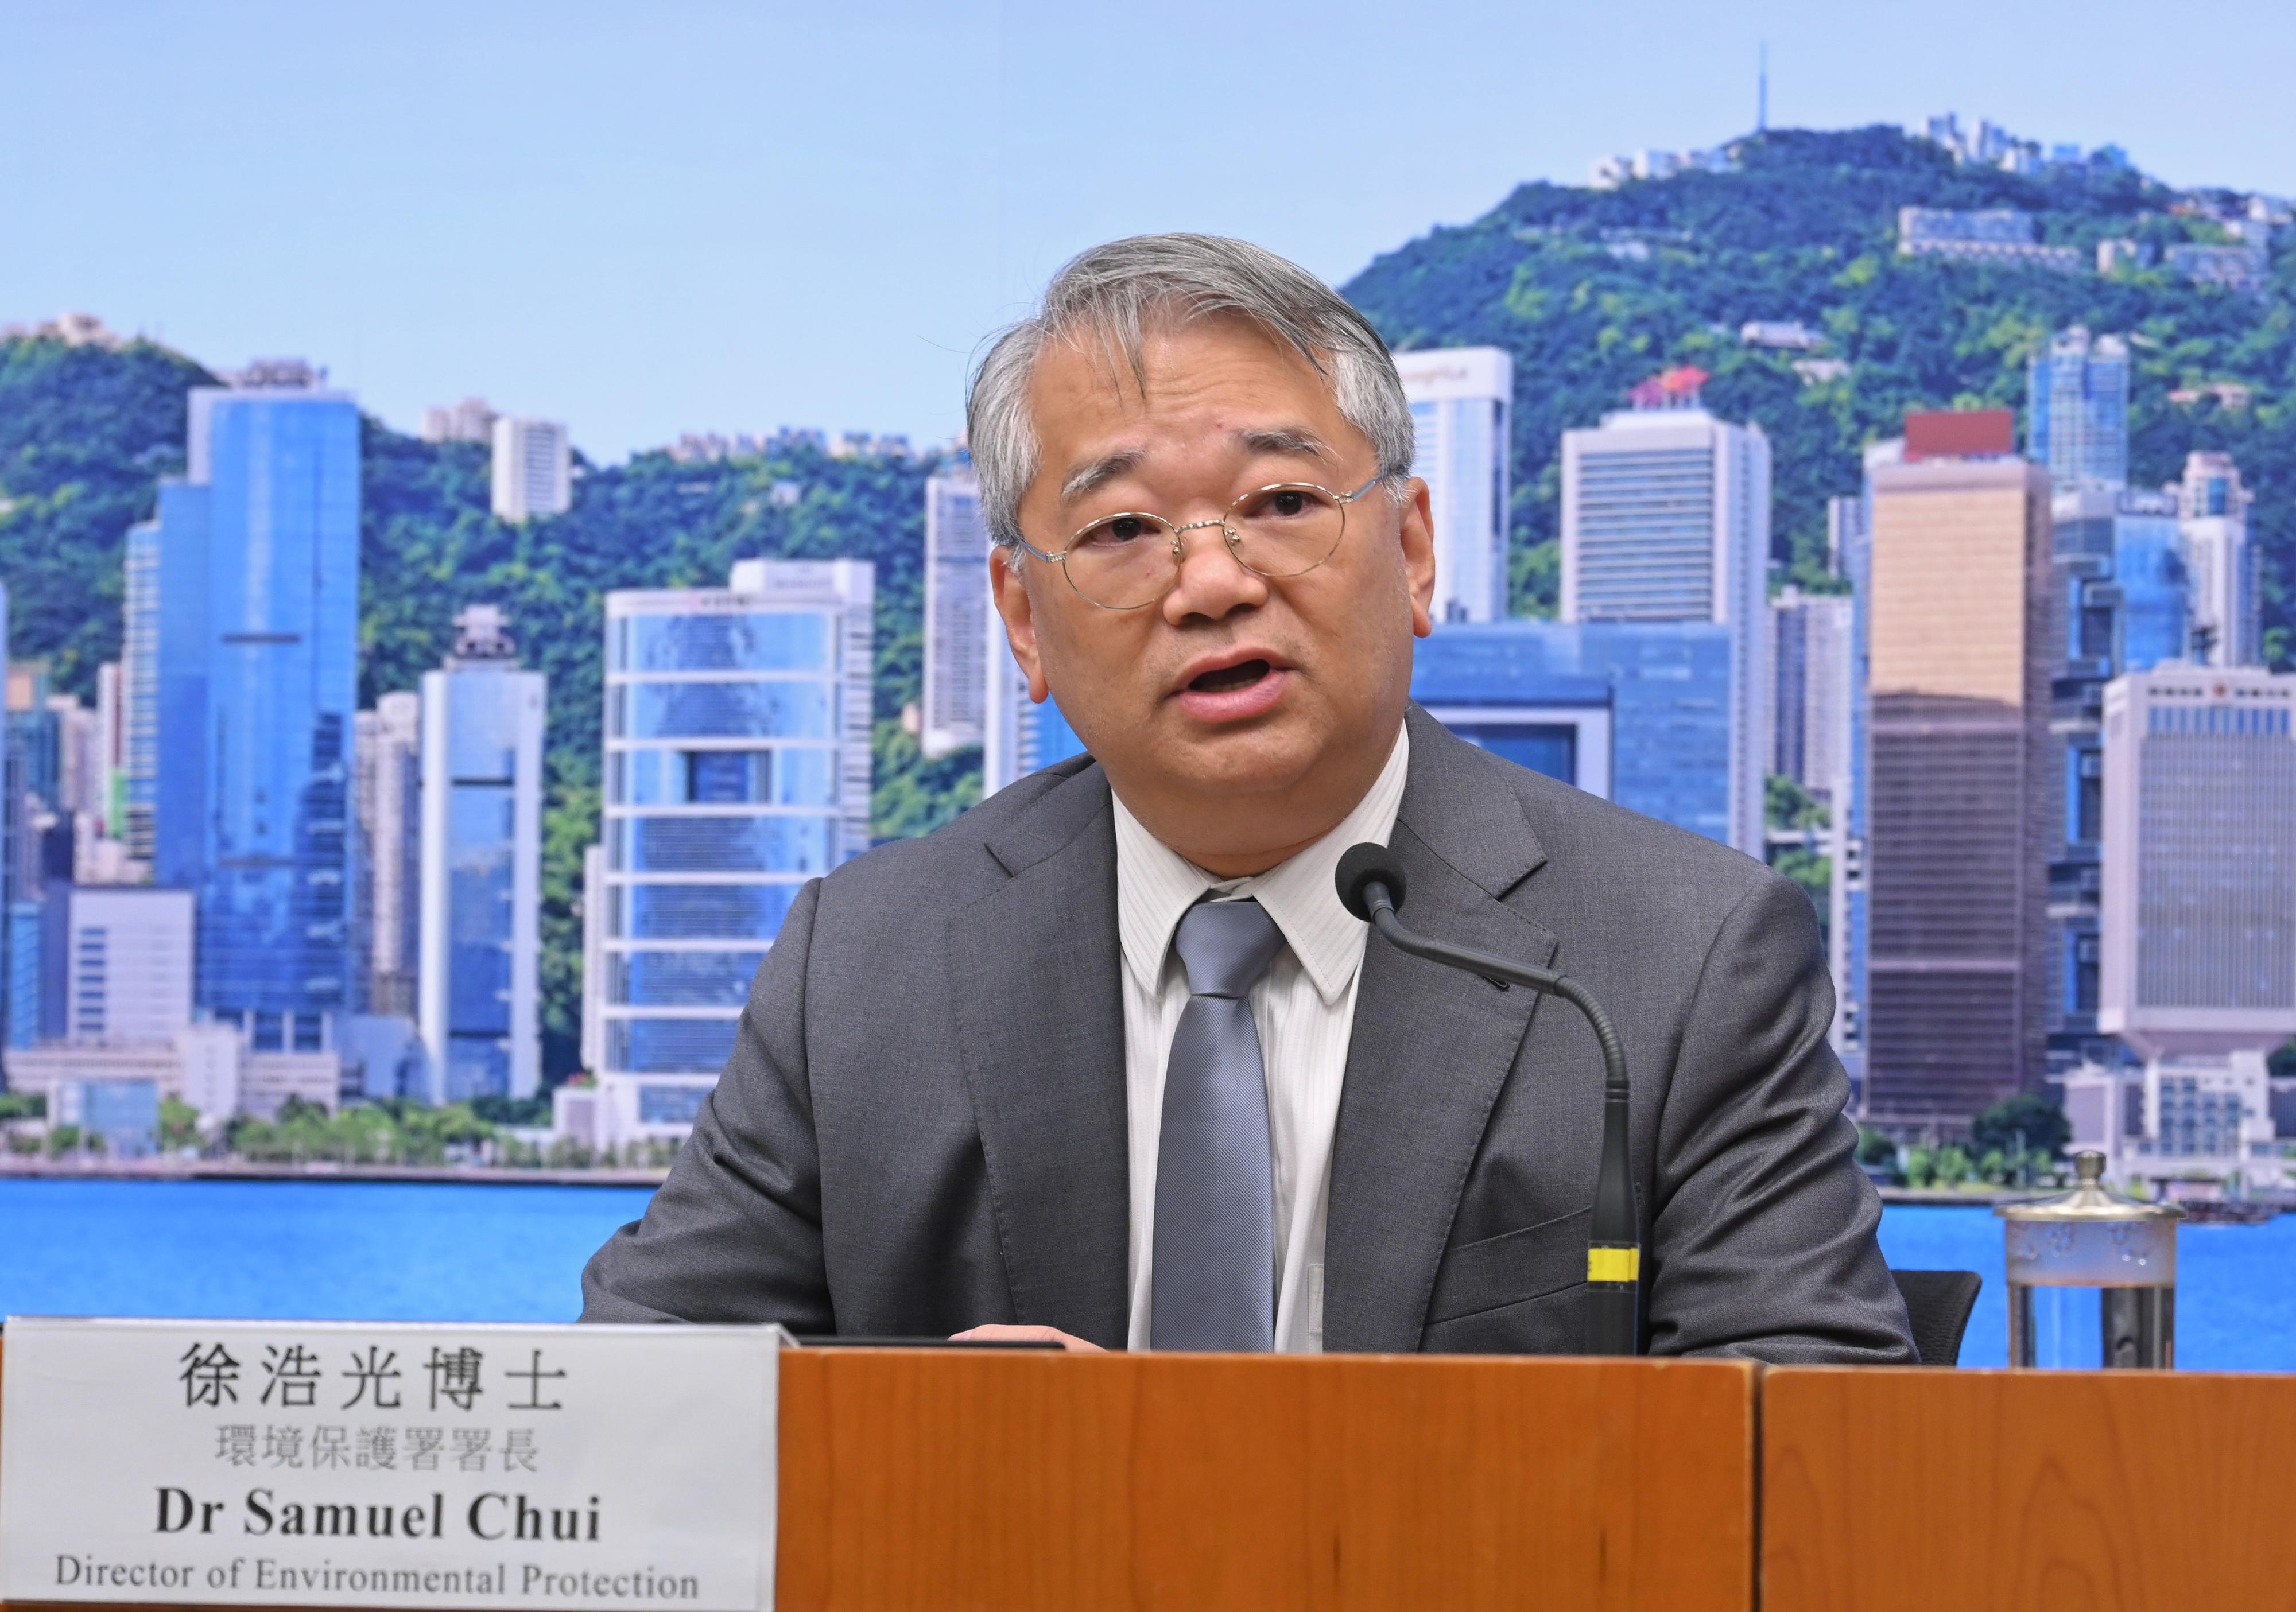 Regarding the application submitted by the Civil Engineering and Development Department under the Environmental Impact Assessment Ordinance, the Director of Environmental Protection today (May 17) approved the Environmental Impact Assessment report for San Tin/Lok Ma Chau Development Node with conditions. Photo shows the Director of Environmental Protection, Dr Samuel Chui, hosting a press conference today to announce and explain the decision.